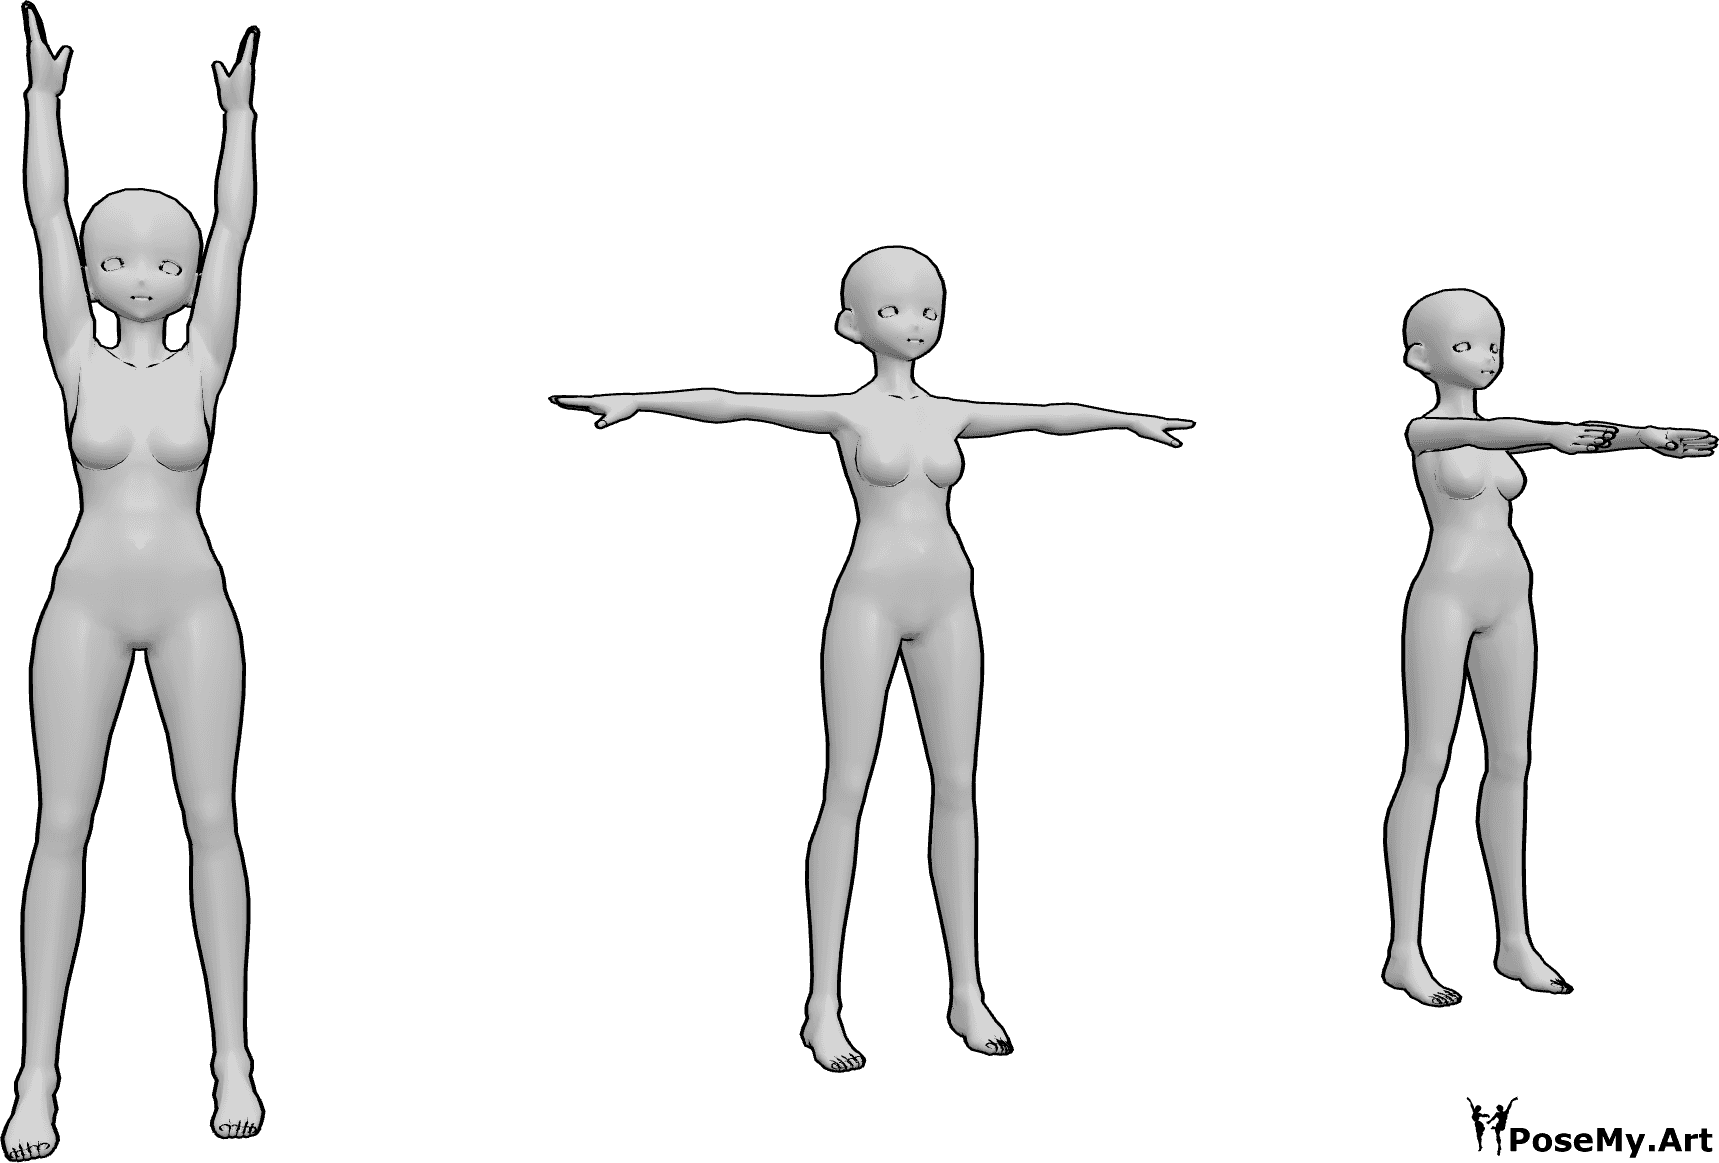 Pose Reference- Anime females gymnastic pose - Three anime females are standing and doing gymnastic exercises